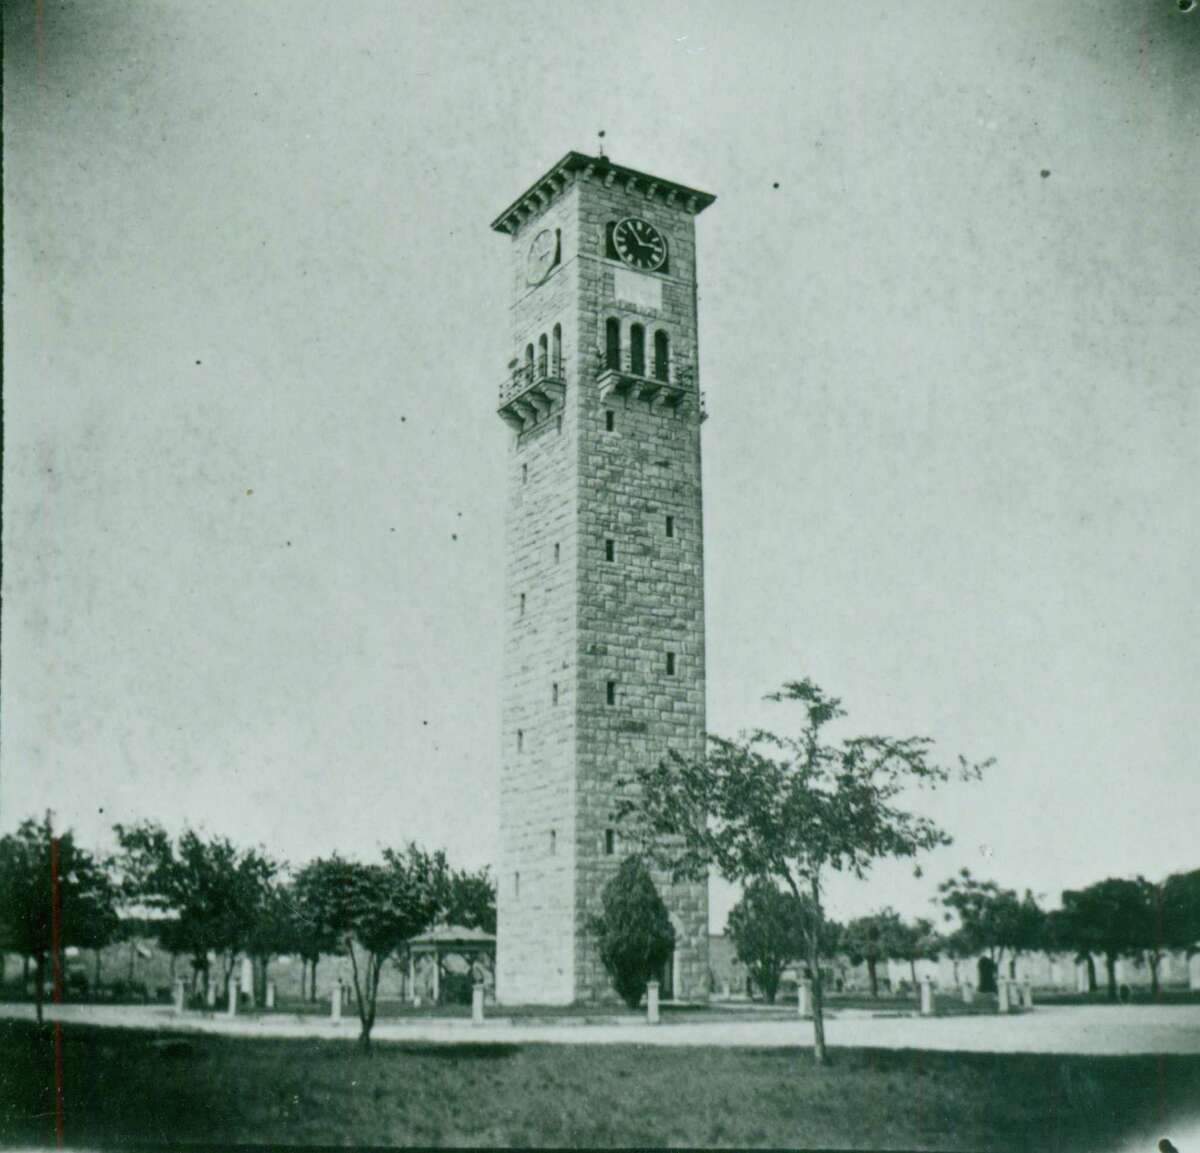 The clock tower in the Quadrangle at Fort Sam Houston in the 1890's.